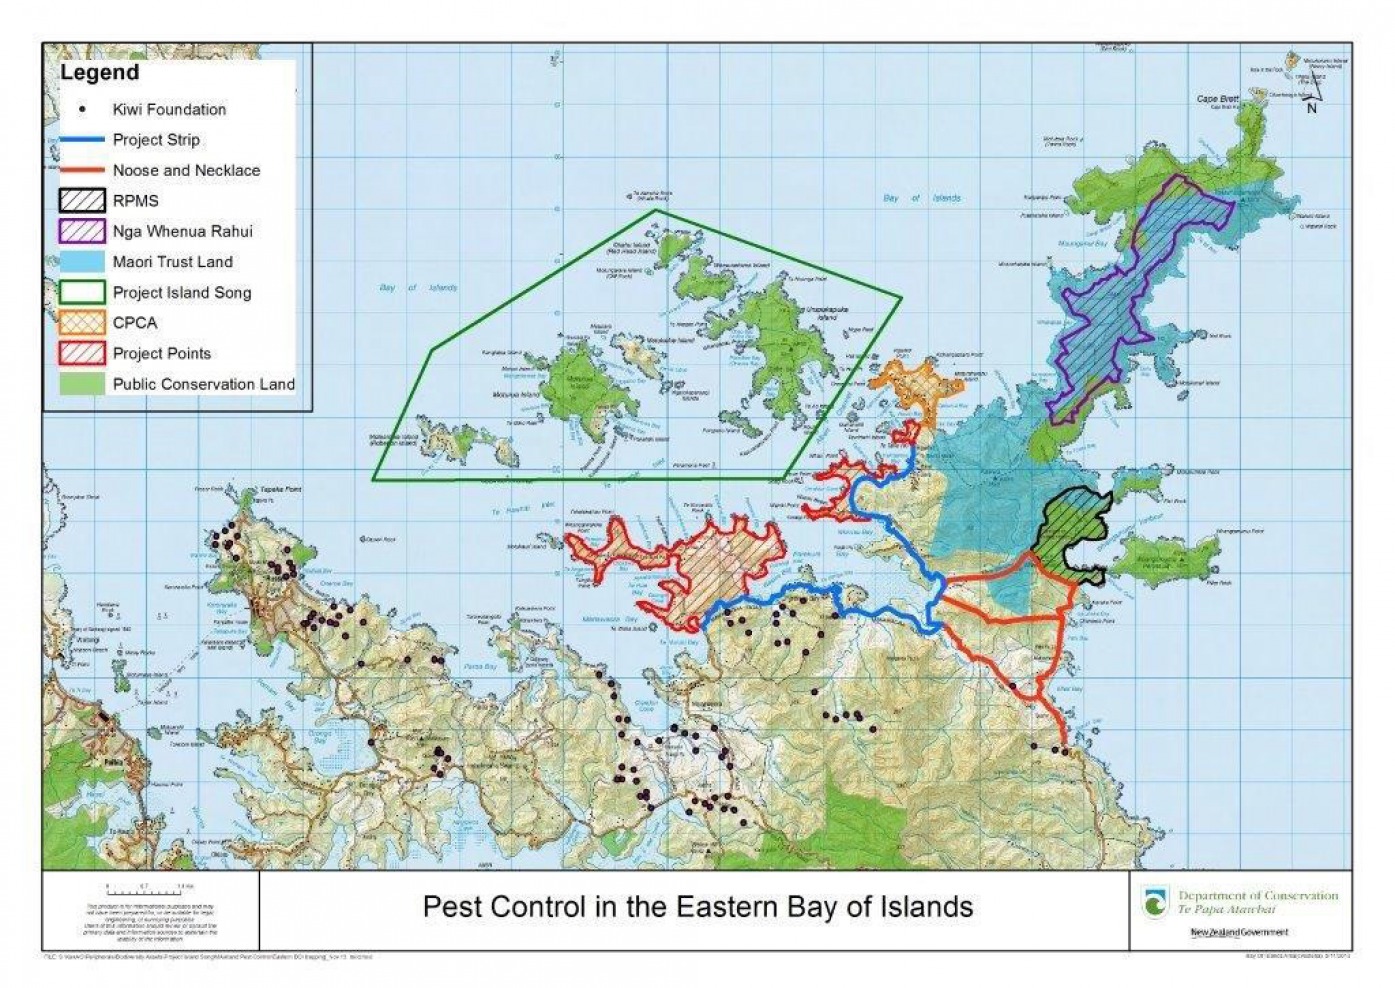 East Bay of Islands enviro trapping work map